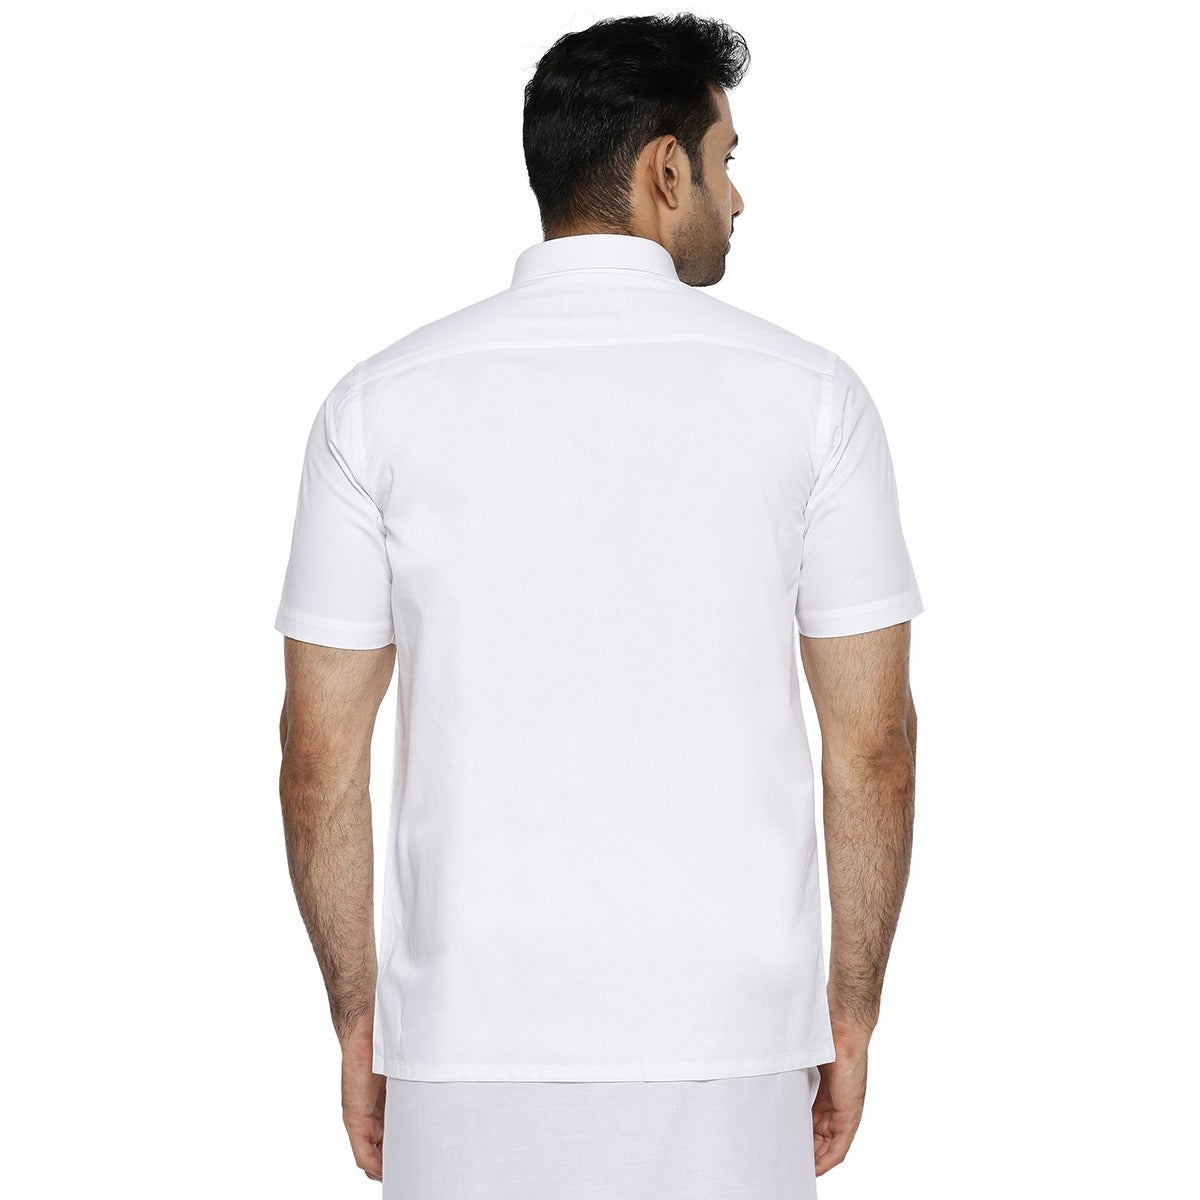 Mens 100% Cotton White Shirt Half Sleeves Classic Cotton- Back view